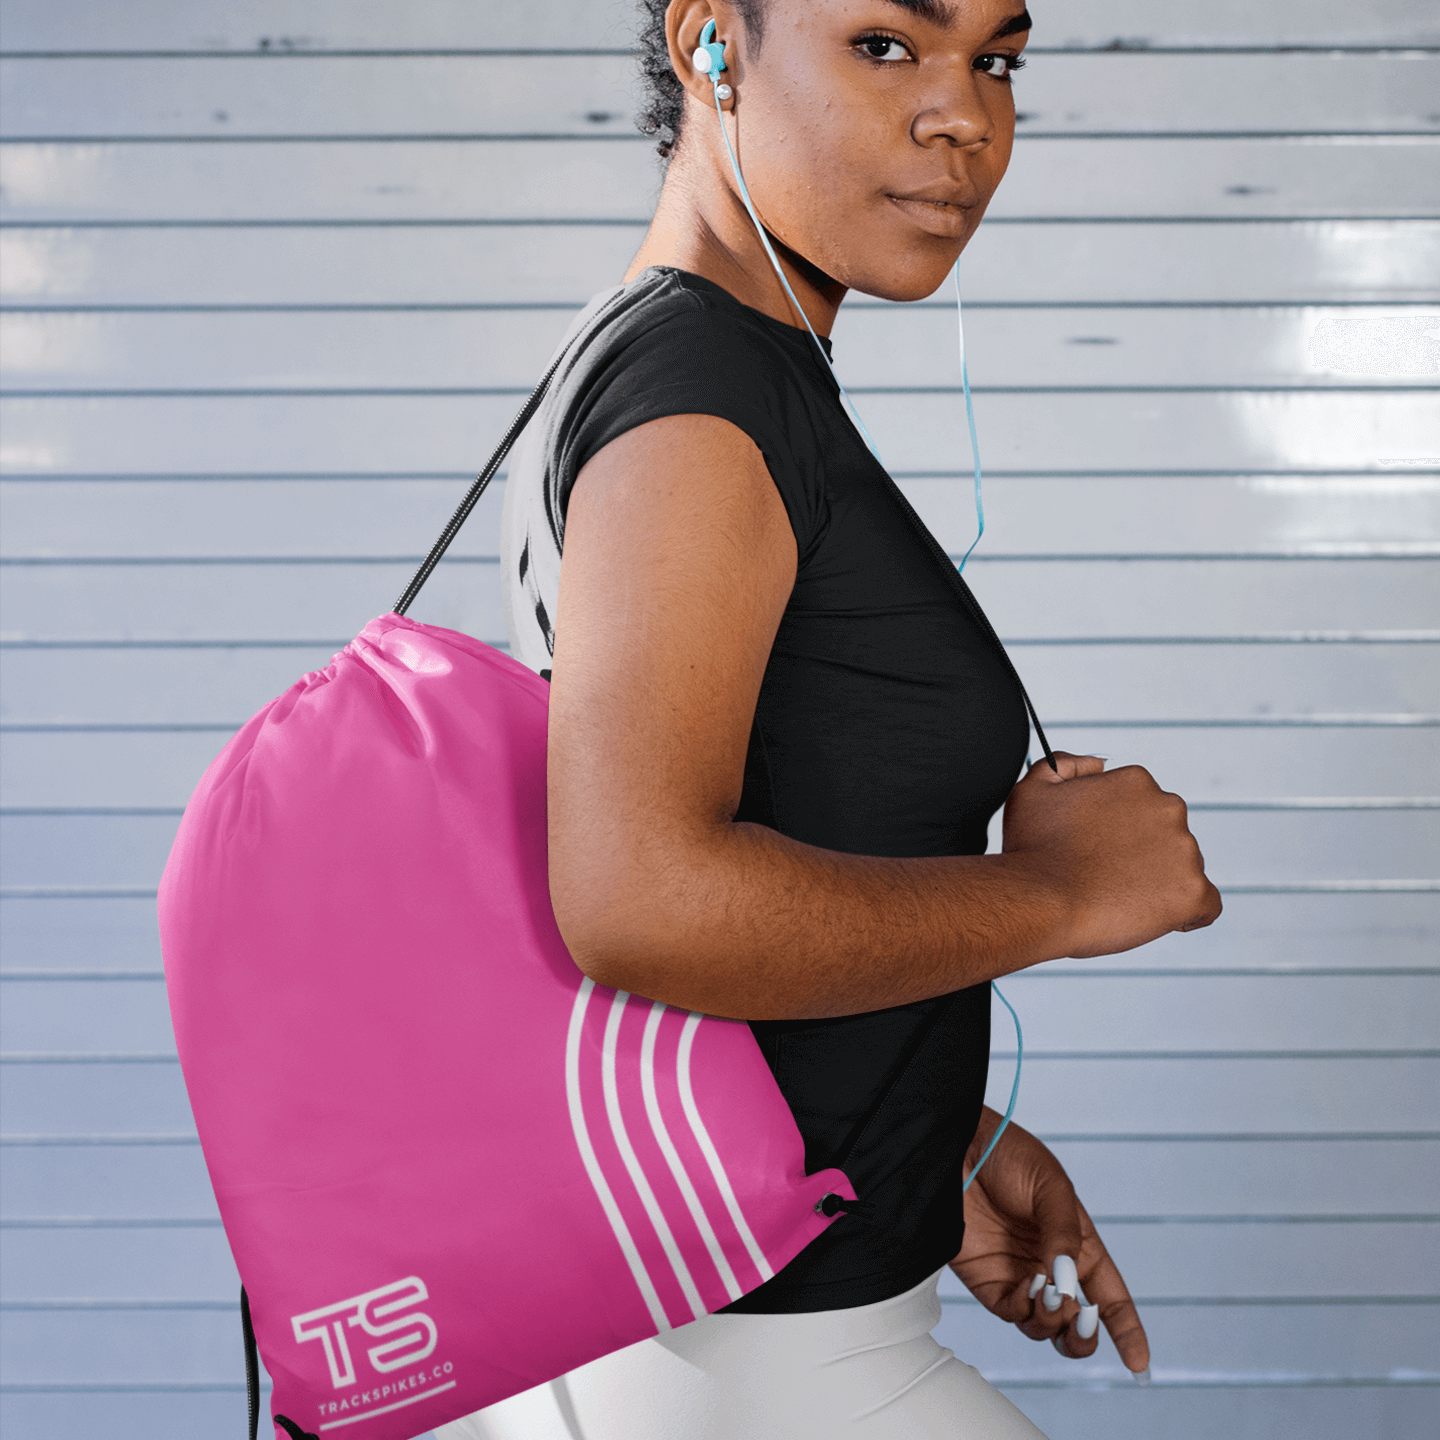 Track Spikes Bag Pink